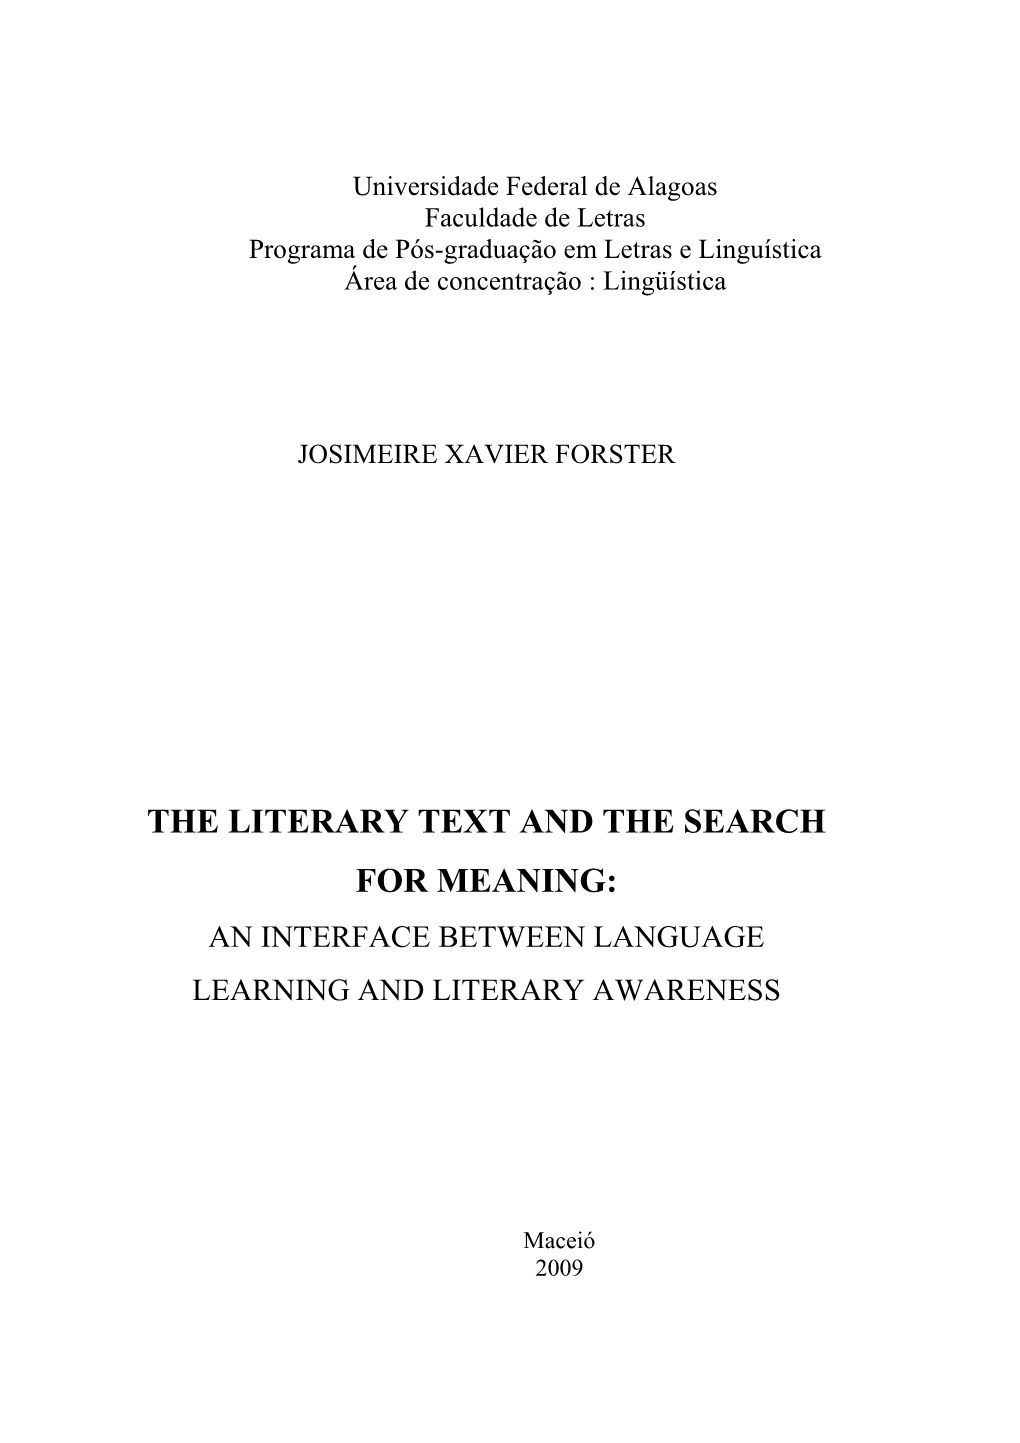 The Literary Text and the Search for Meaning: an Interface Between Language Learning and Literary Awareness